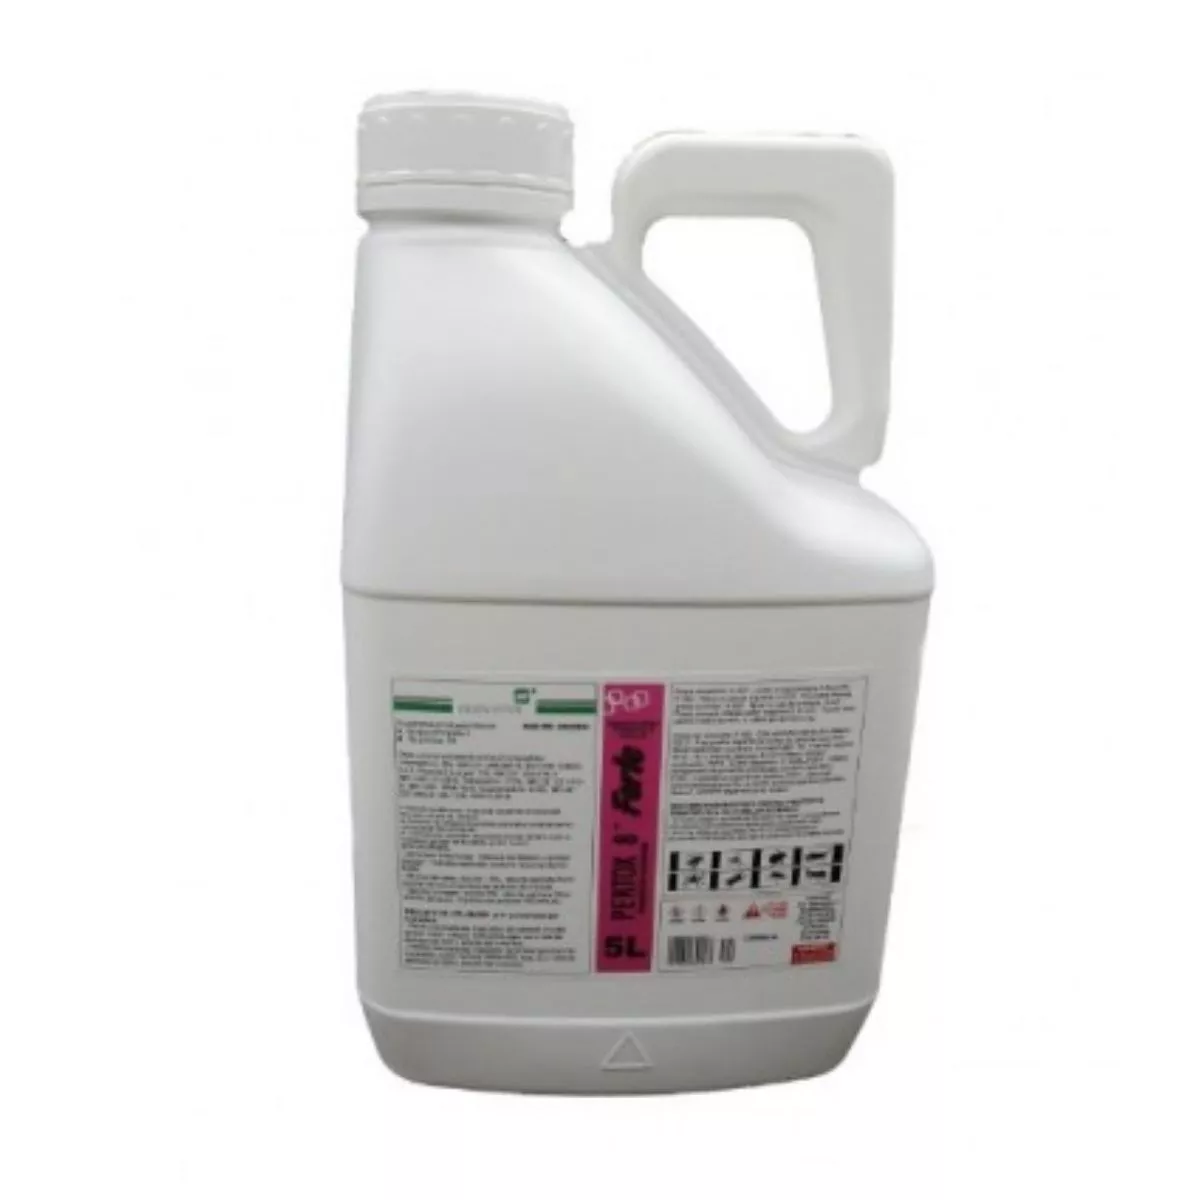 Insecticid concentrat PERTOX 8 FORTE 5 L ,Pestmaster 1